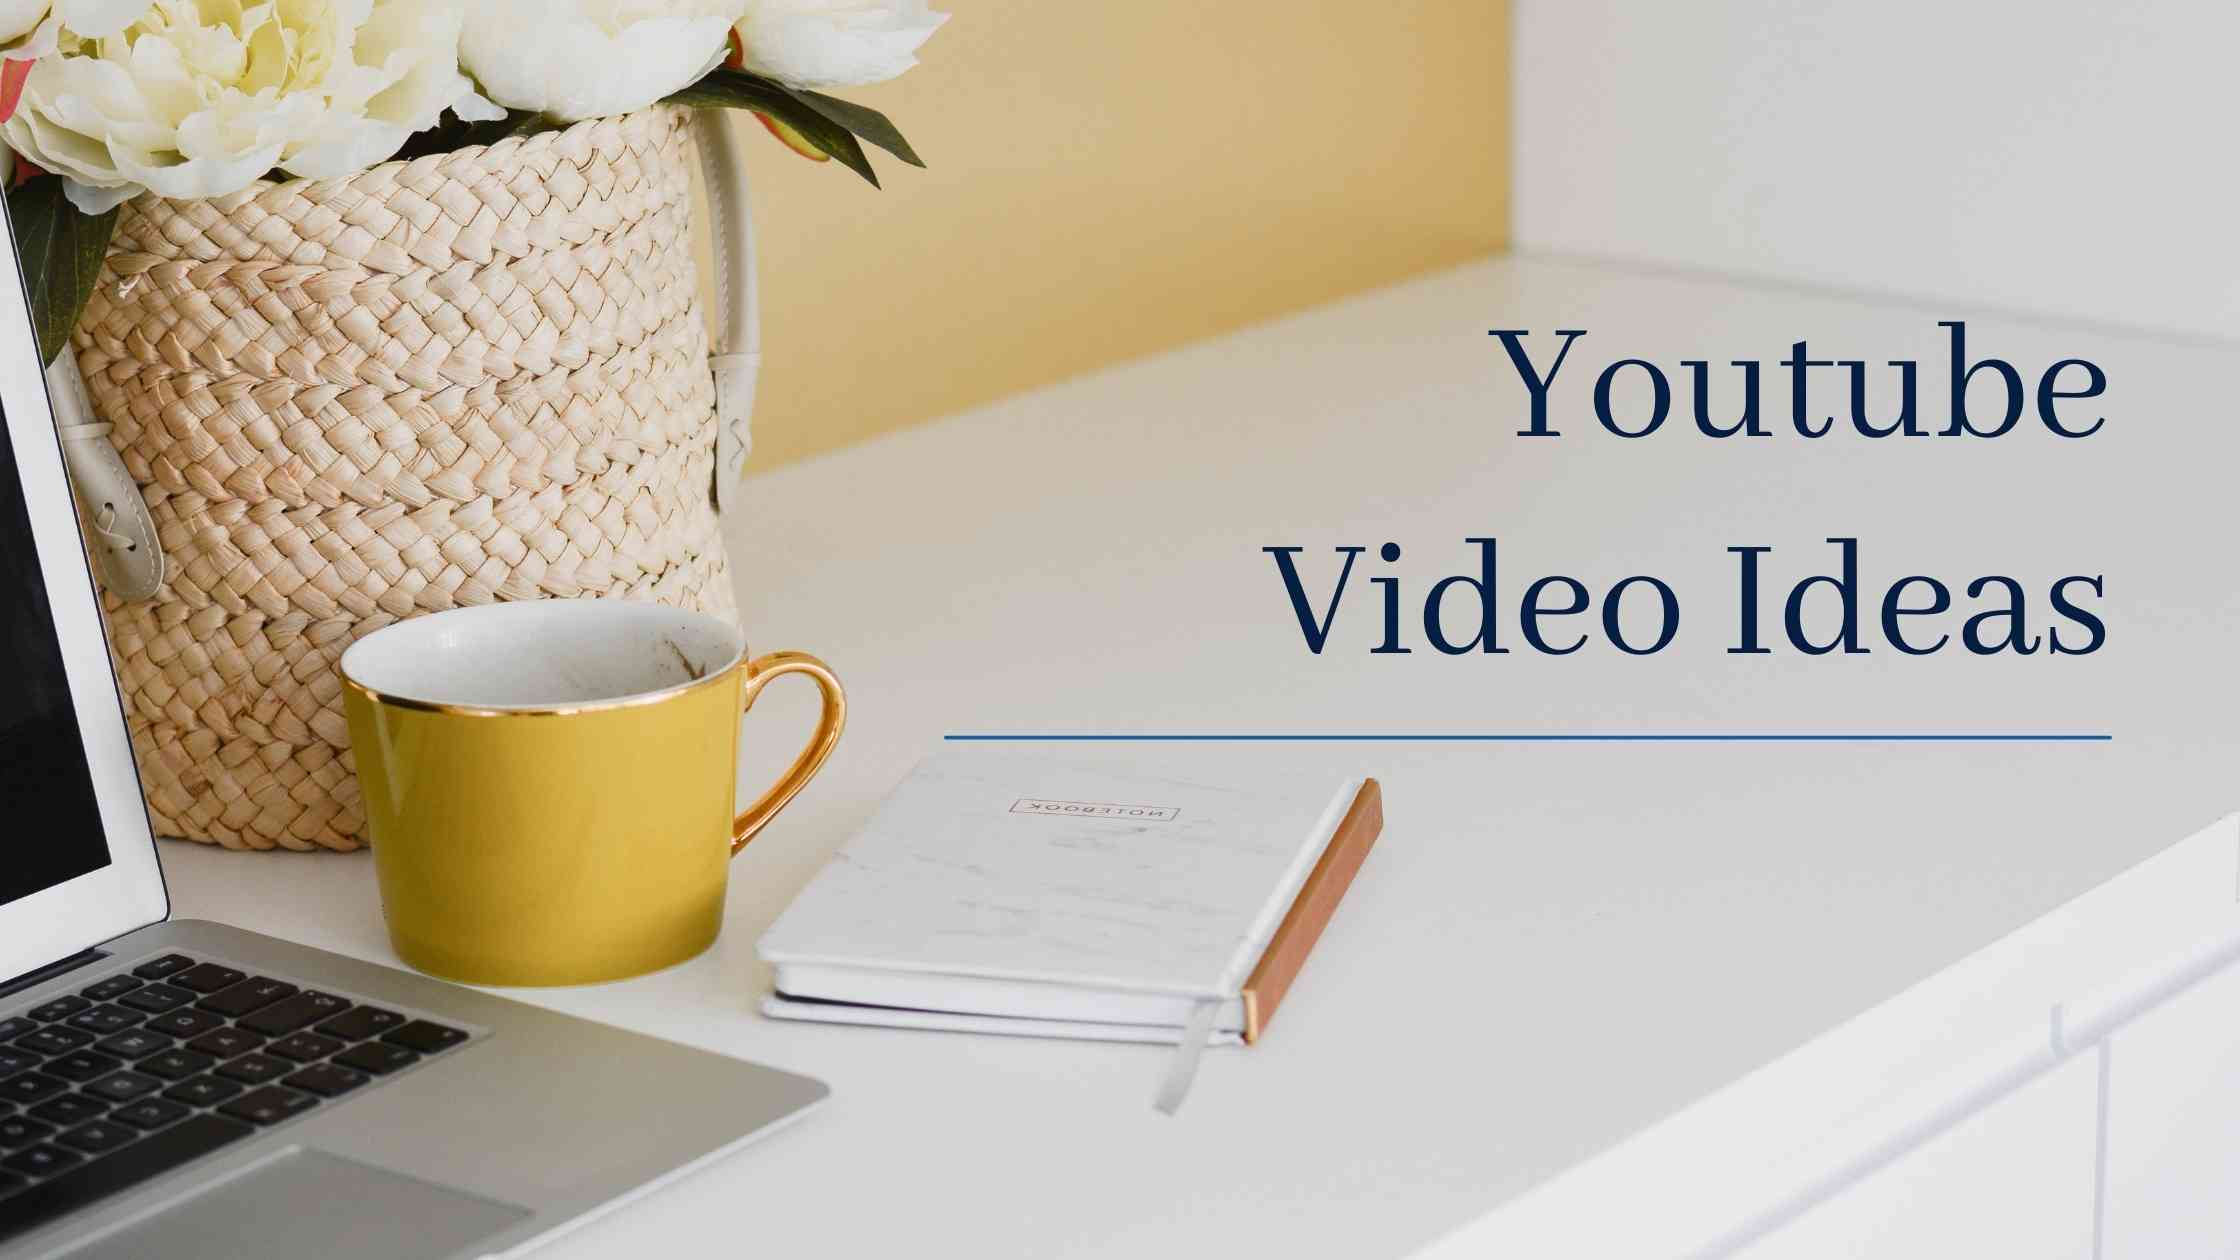 Check out these seven simple YouTube videos that will give you the creative inspiration to create better content.